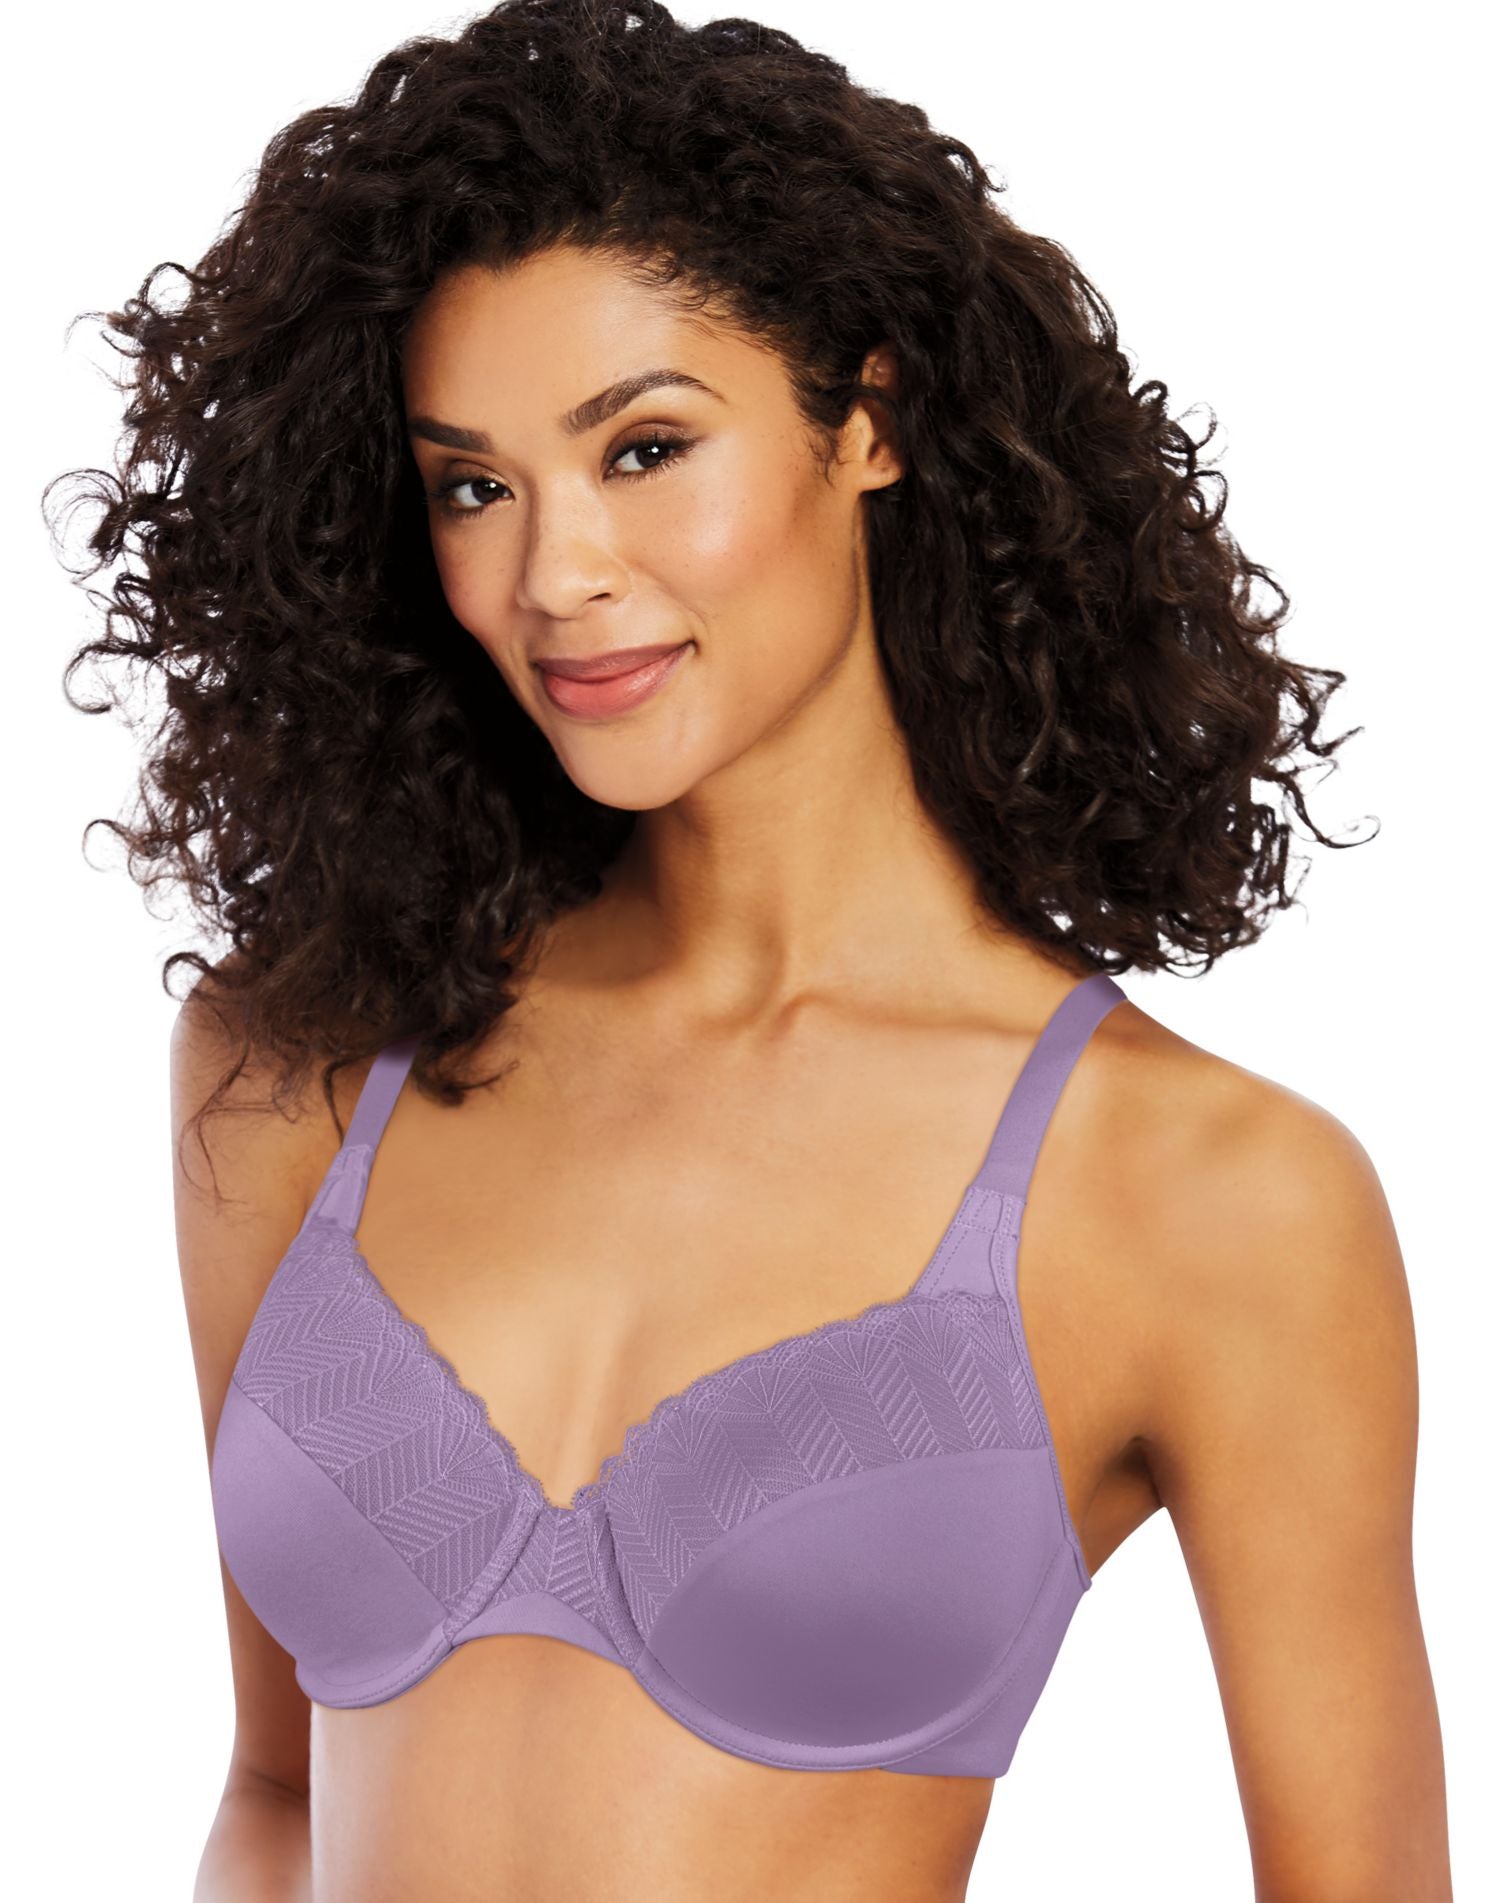 Bali T-Shirt Bra Passion For Comfort Smoothing & Light Lift Womens Back  Smoothing DF0082 